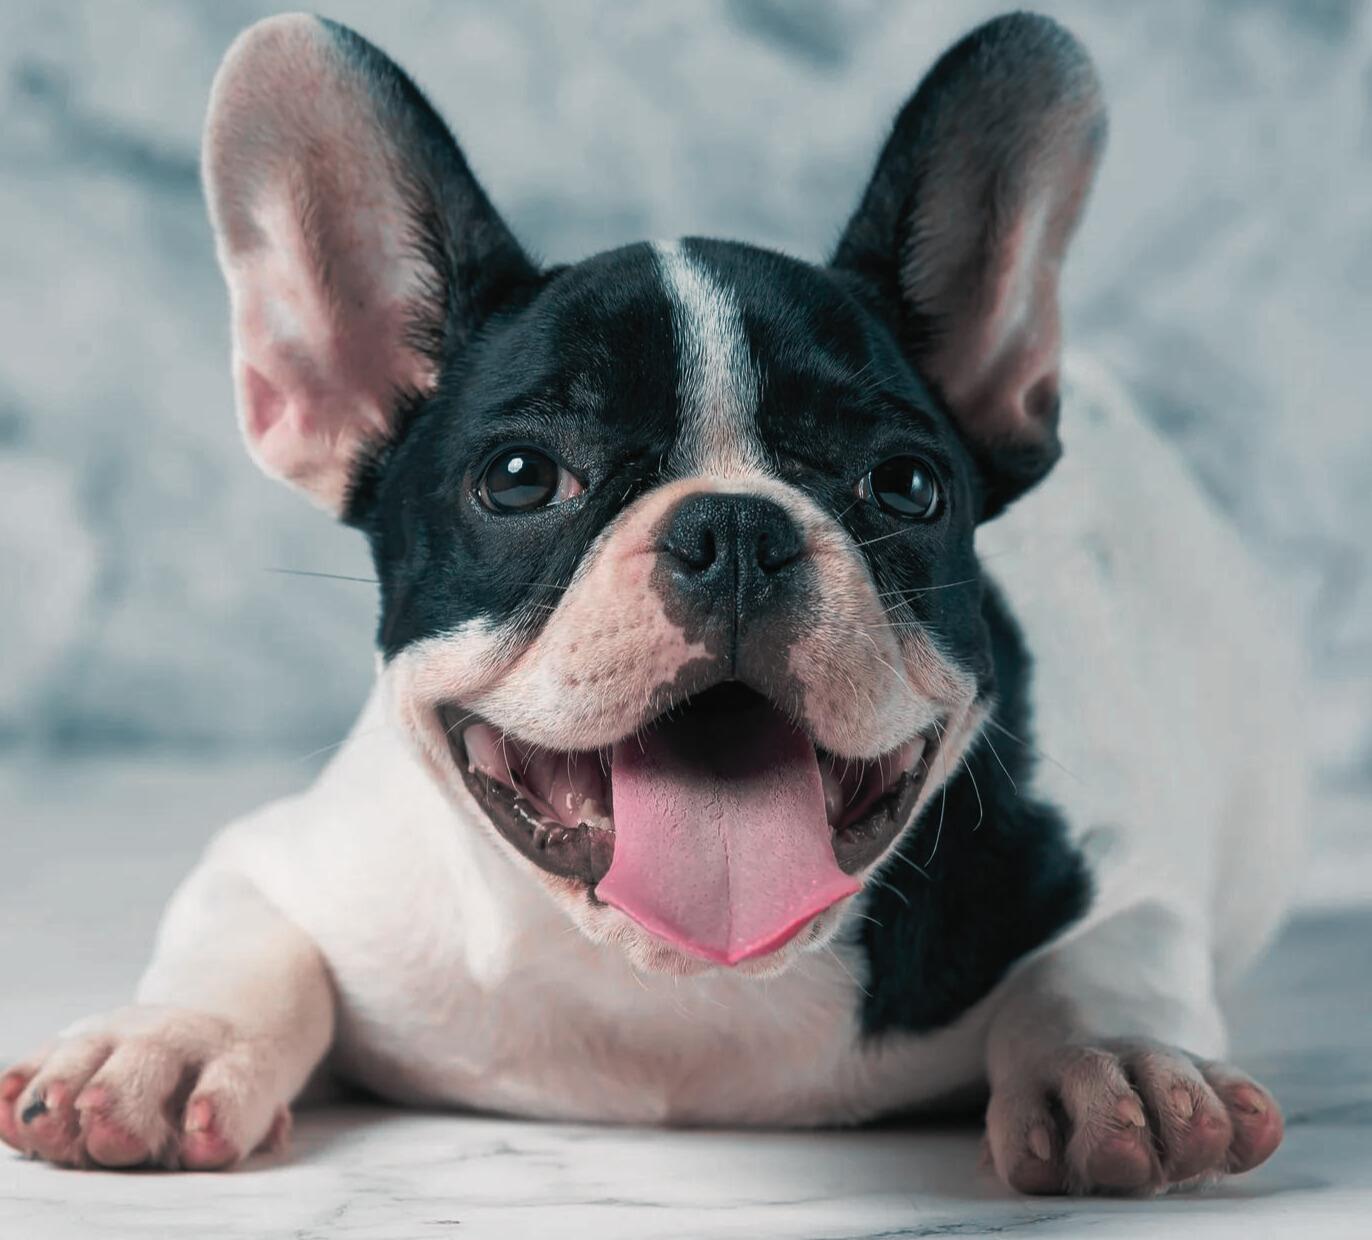 How to Take Care of a Frenchie Puppy